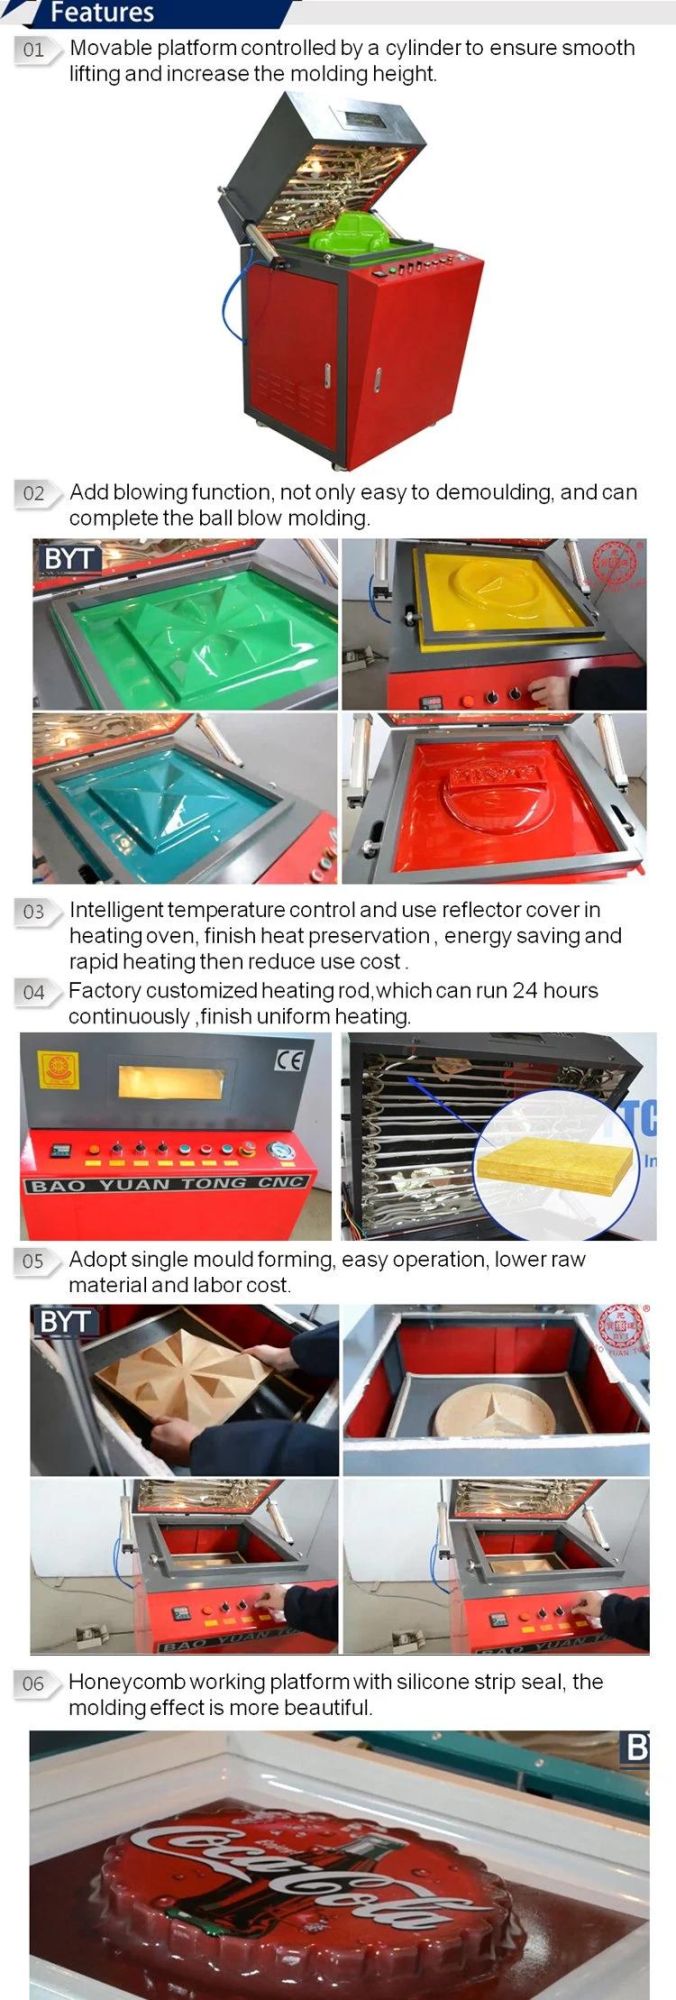 Best Selling Plastic Small 6060 Vacuum Forming Machine for Sale